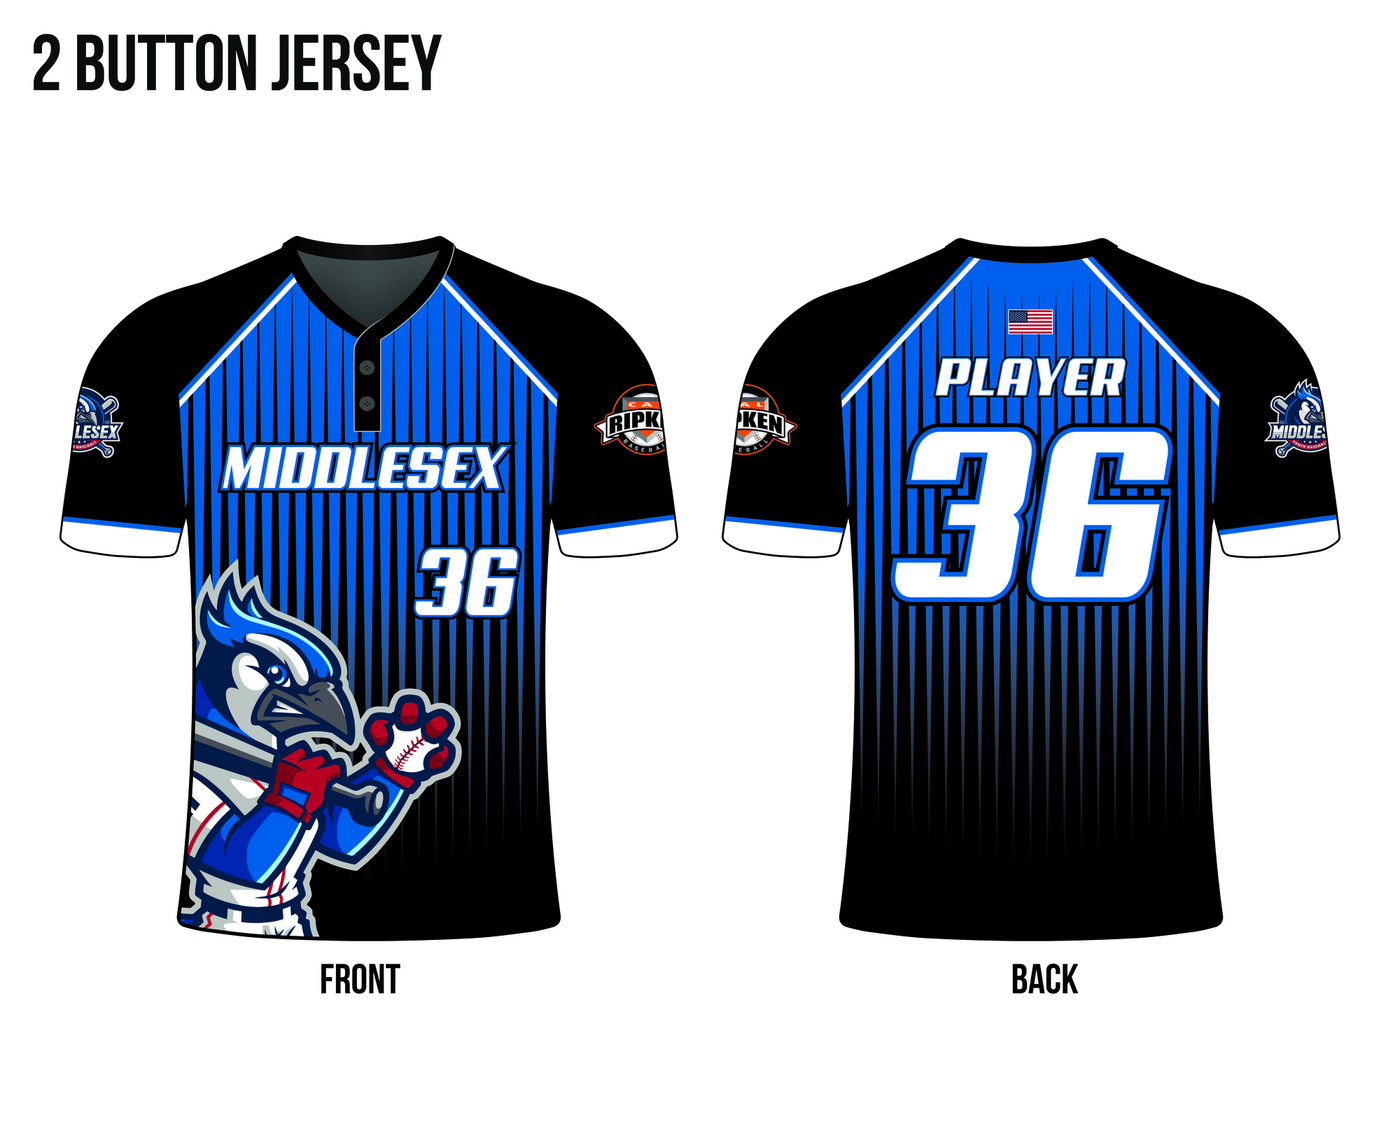 Full sub sublimated two button jerseys for baseball, fastpitch